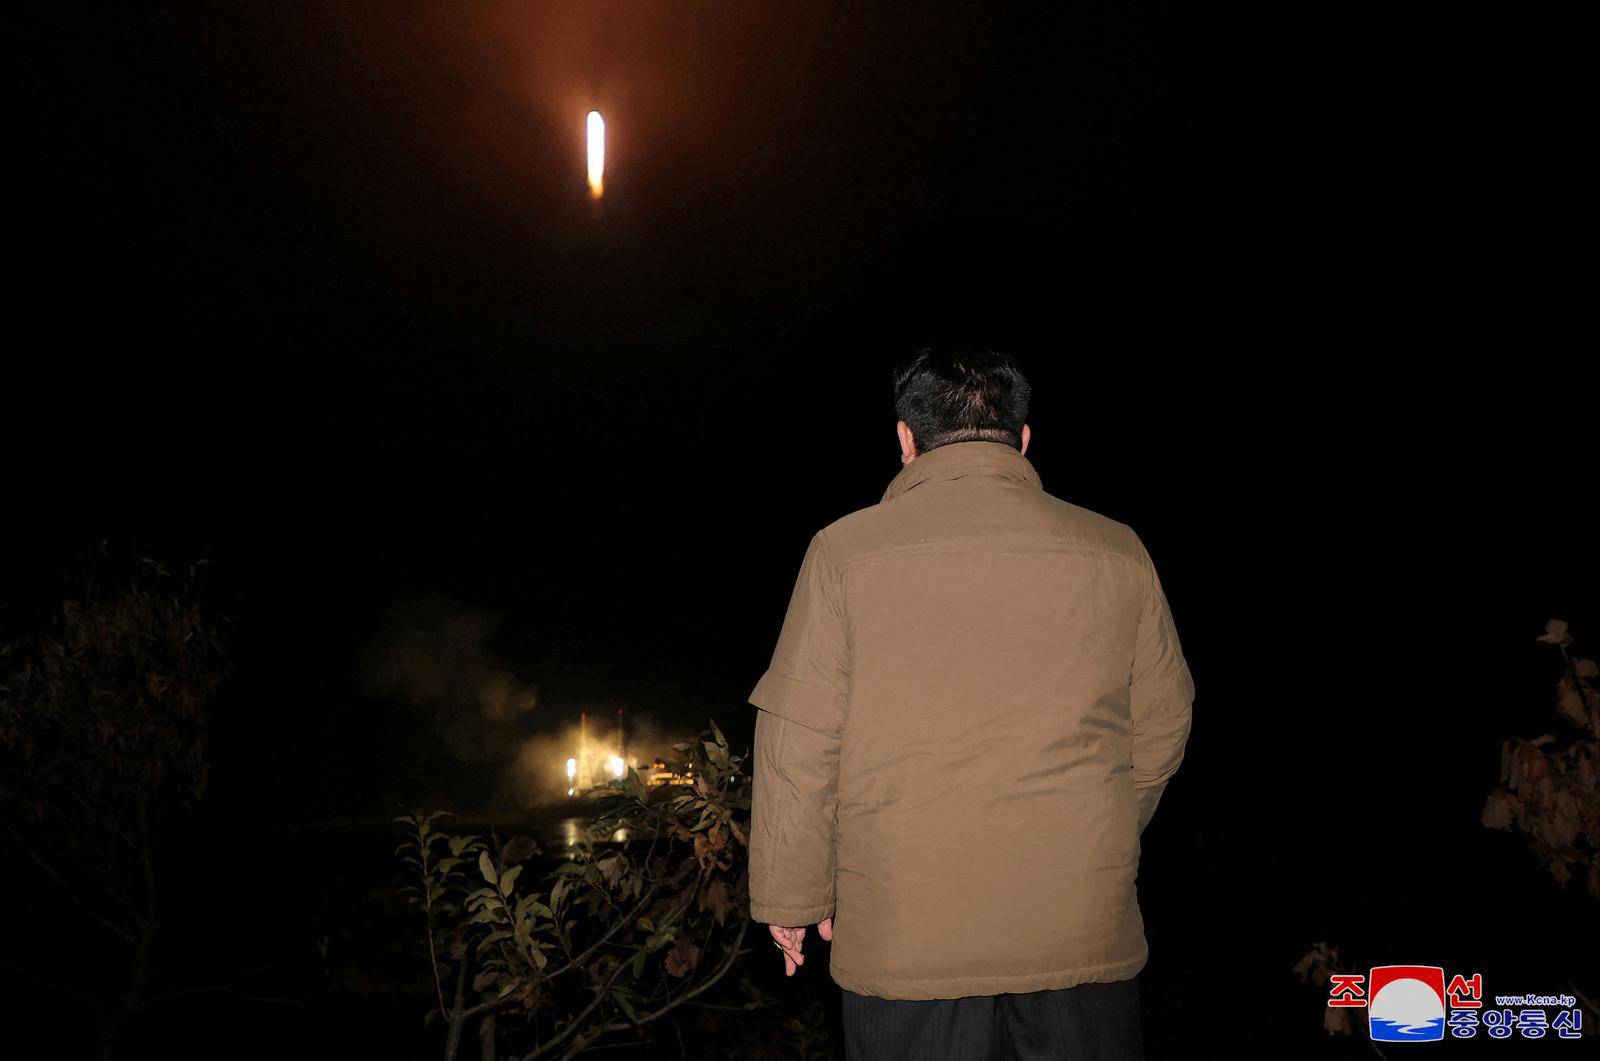 FILE PHOTO: North Korea claims it launched first spy satellite